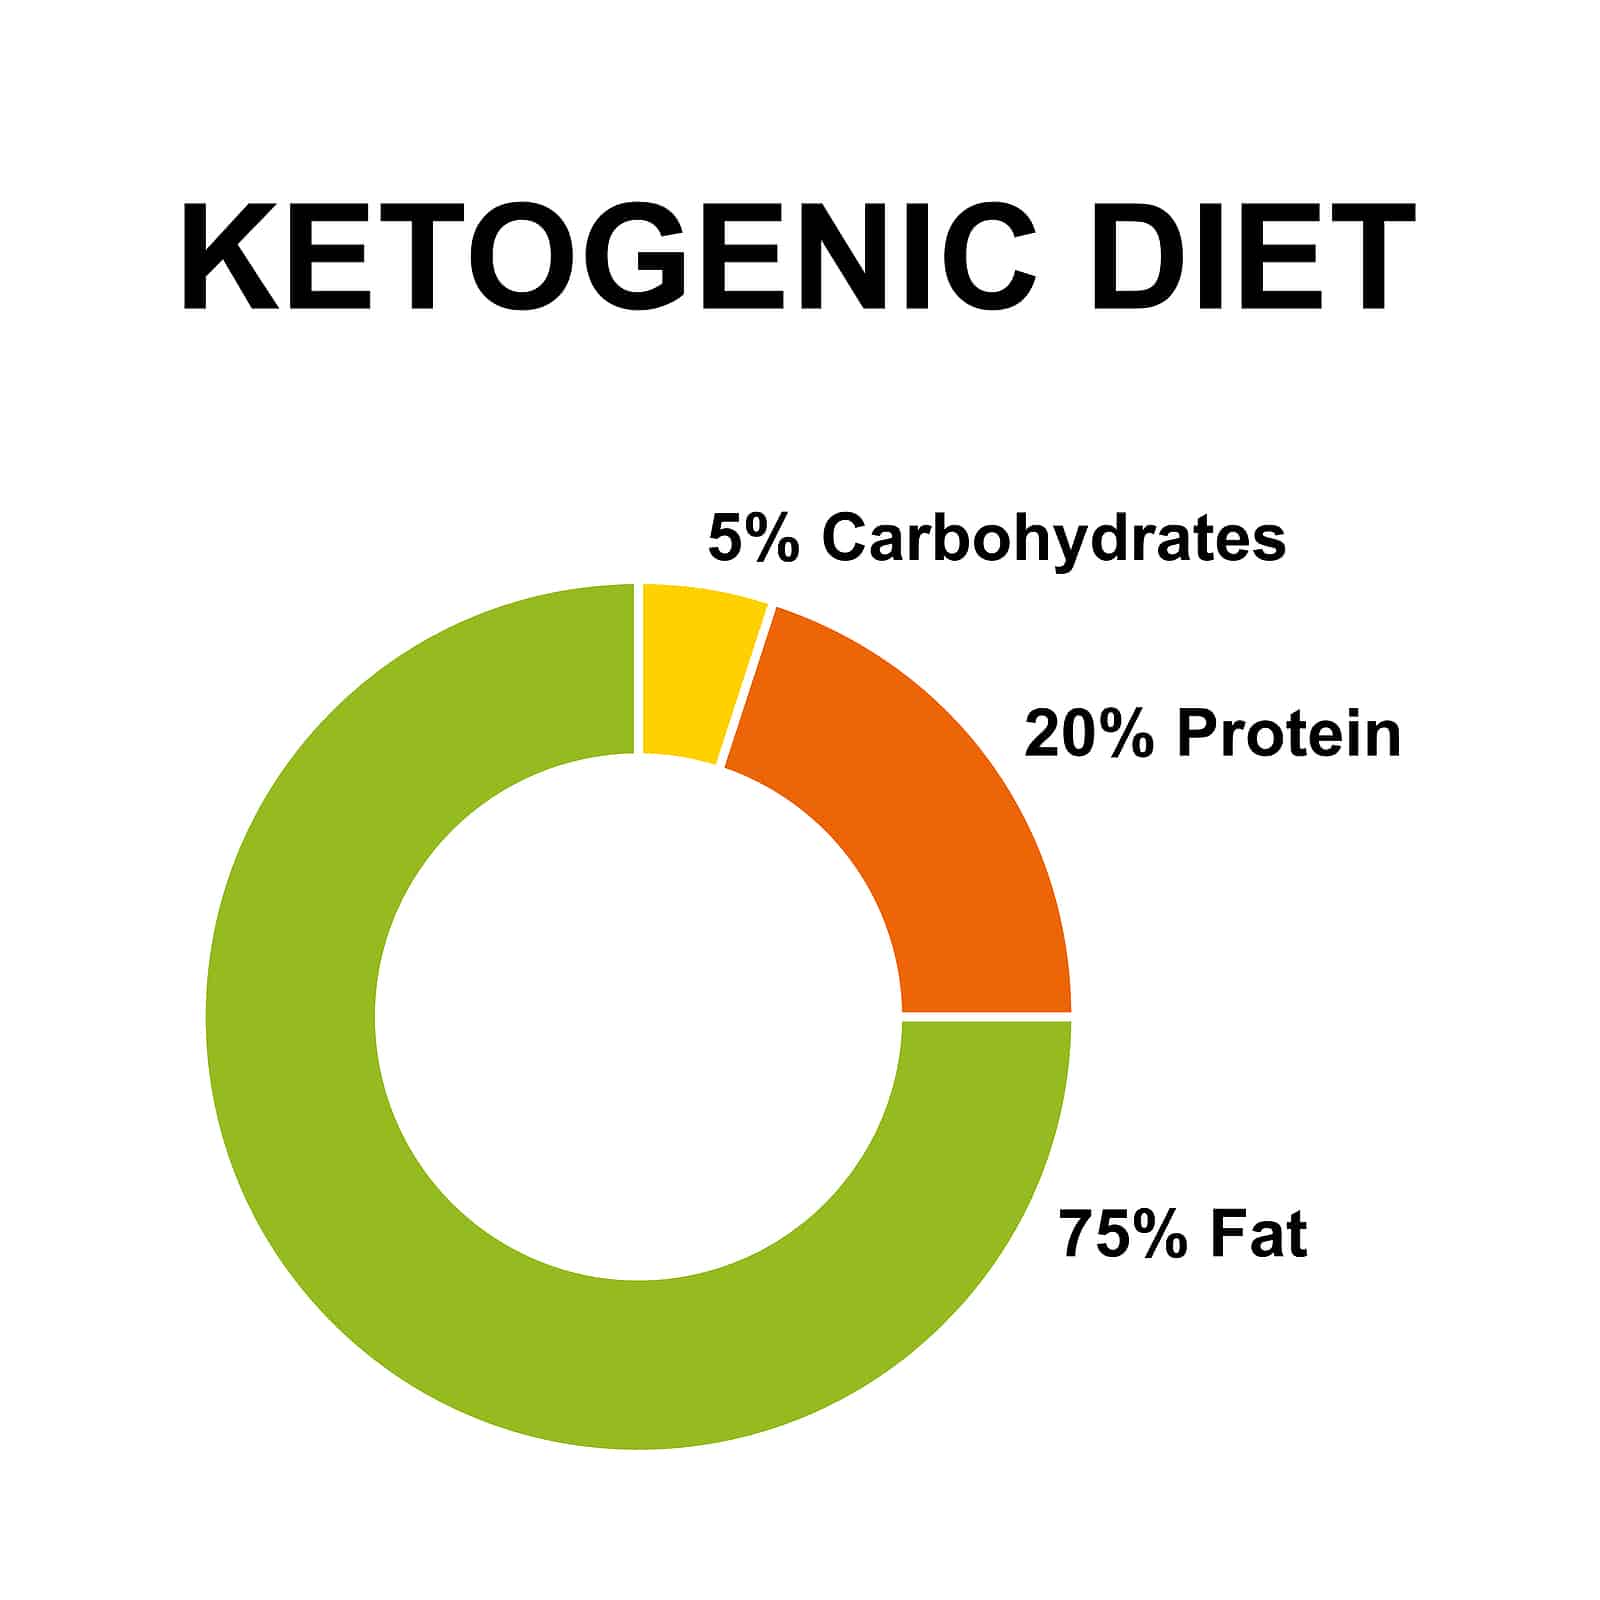 Diet, Donut Chart With Percentages Of Carbohydrates, P